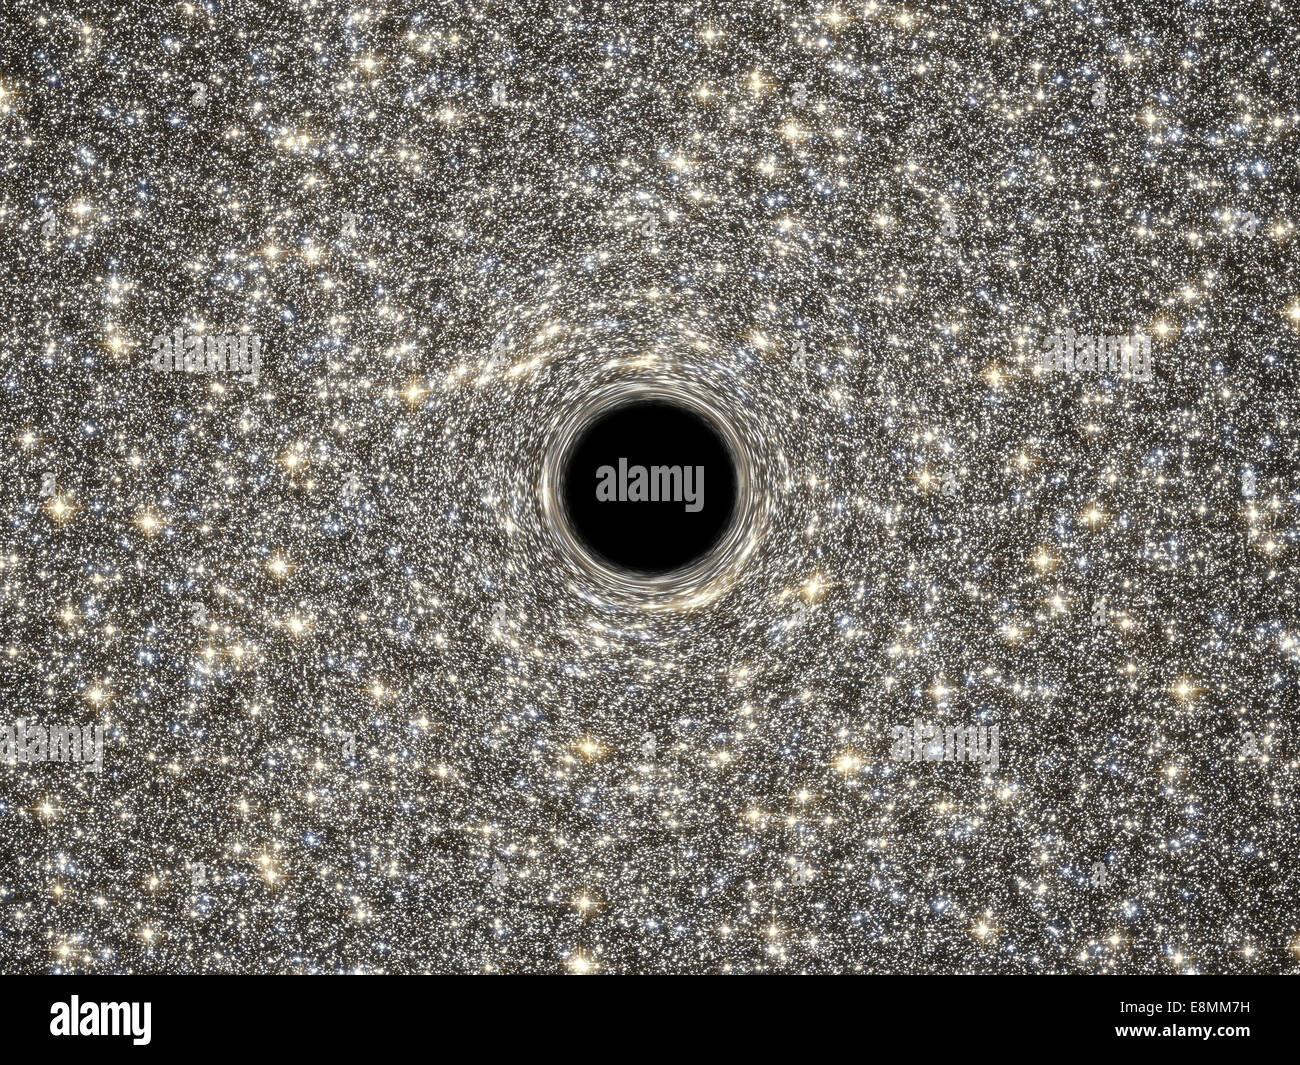 An illustration of a supermassive black hole, weighing as much as 21 million suns, located in the middle of the ultradense galax Stock Photo